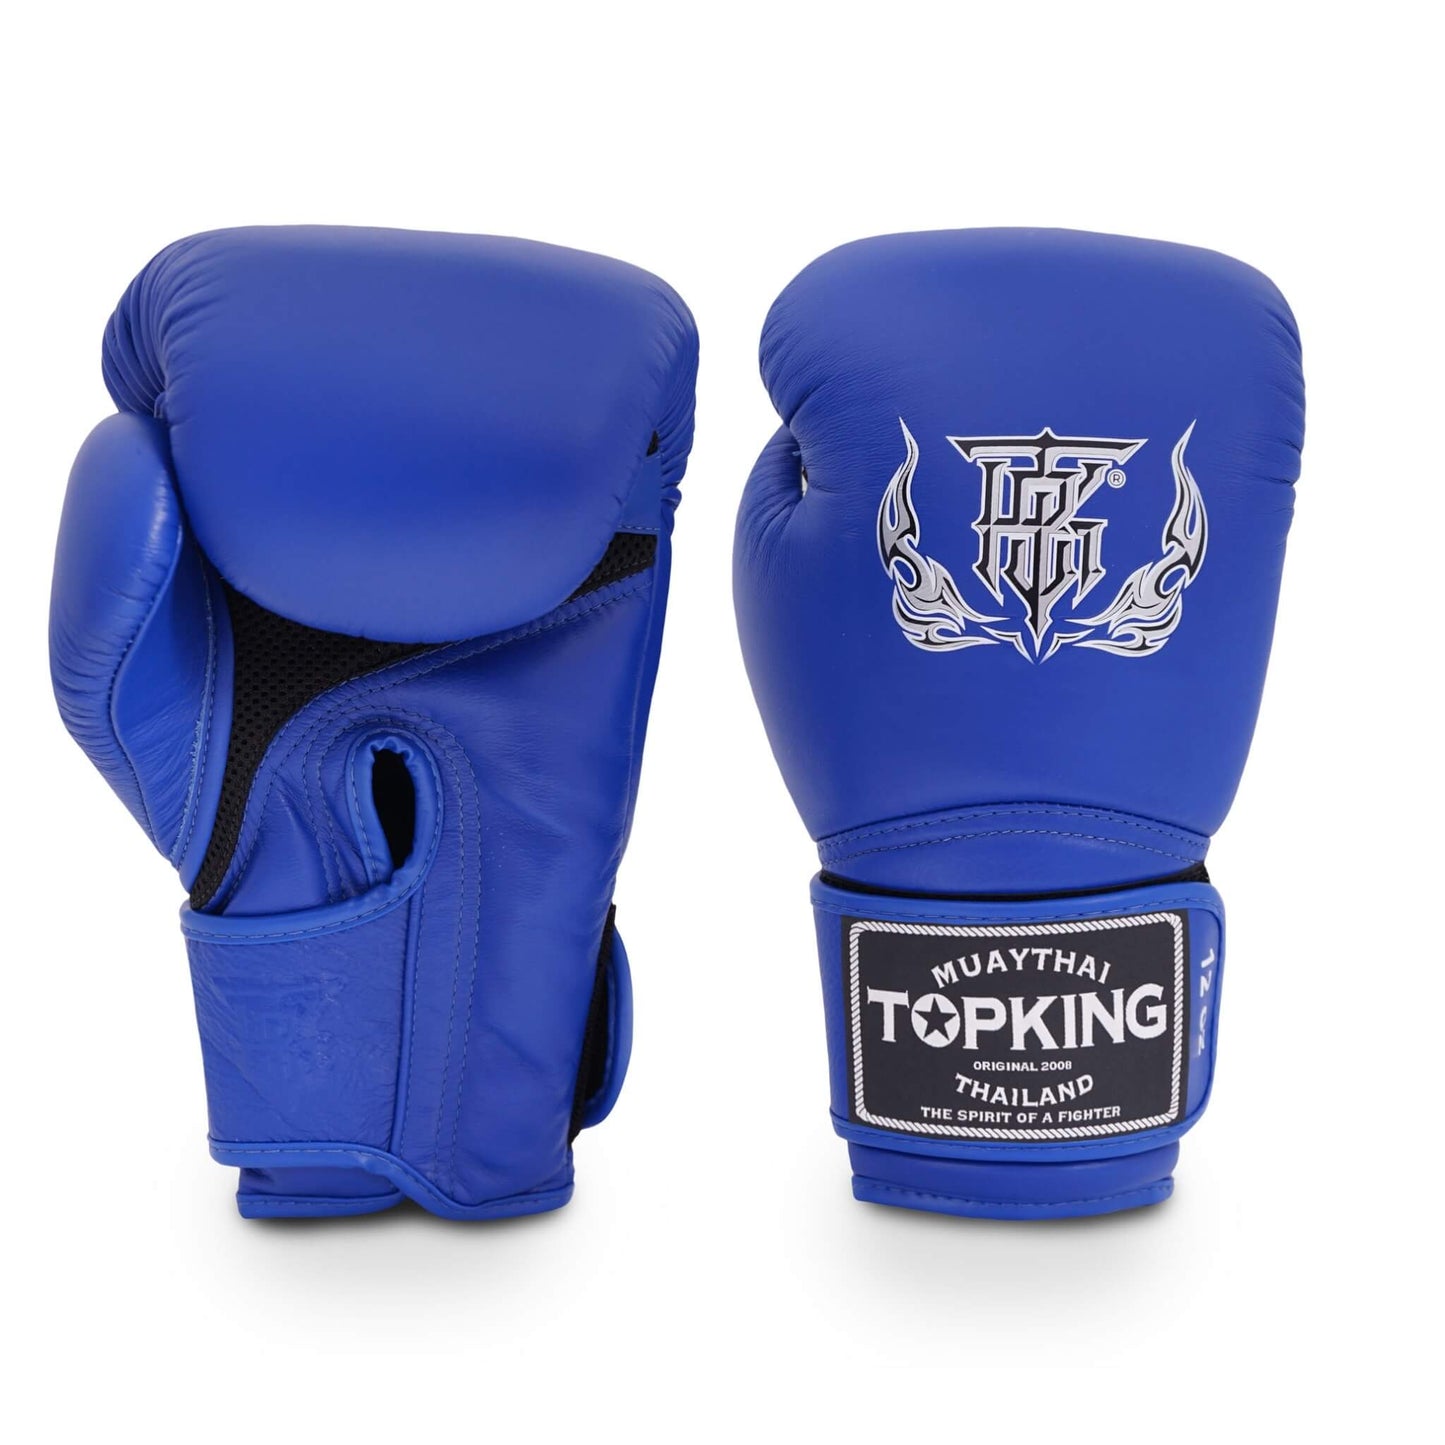 Top King Pro Blue Boxing Gloves